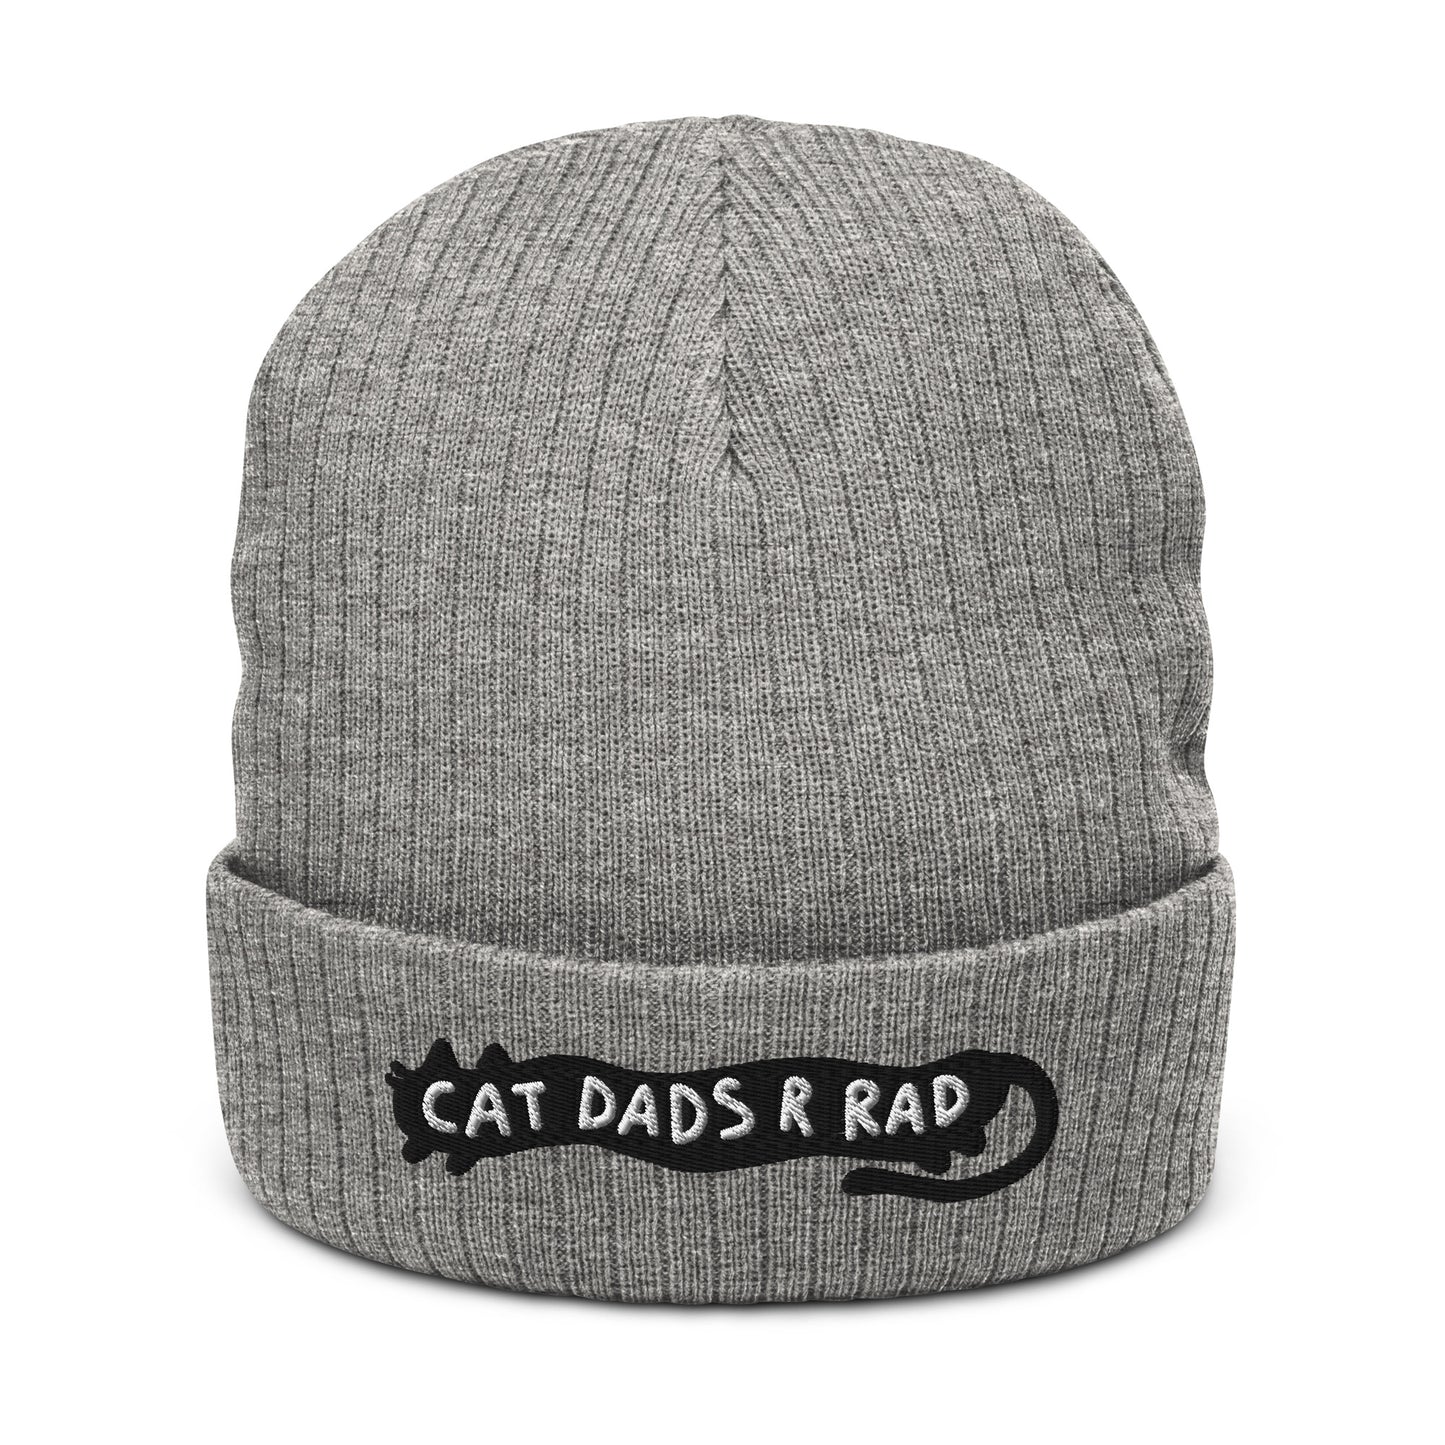 Cat Dads Are Rad Beanie